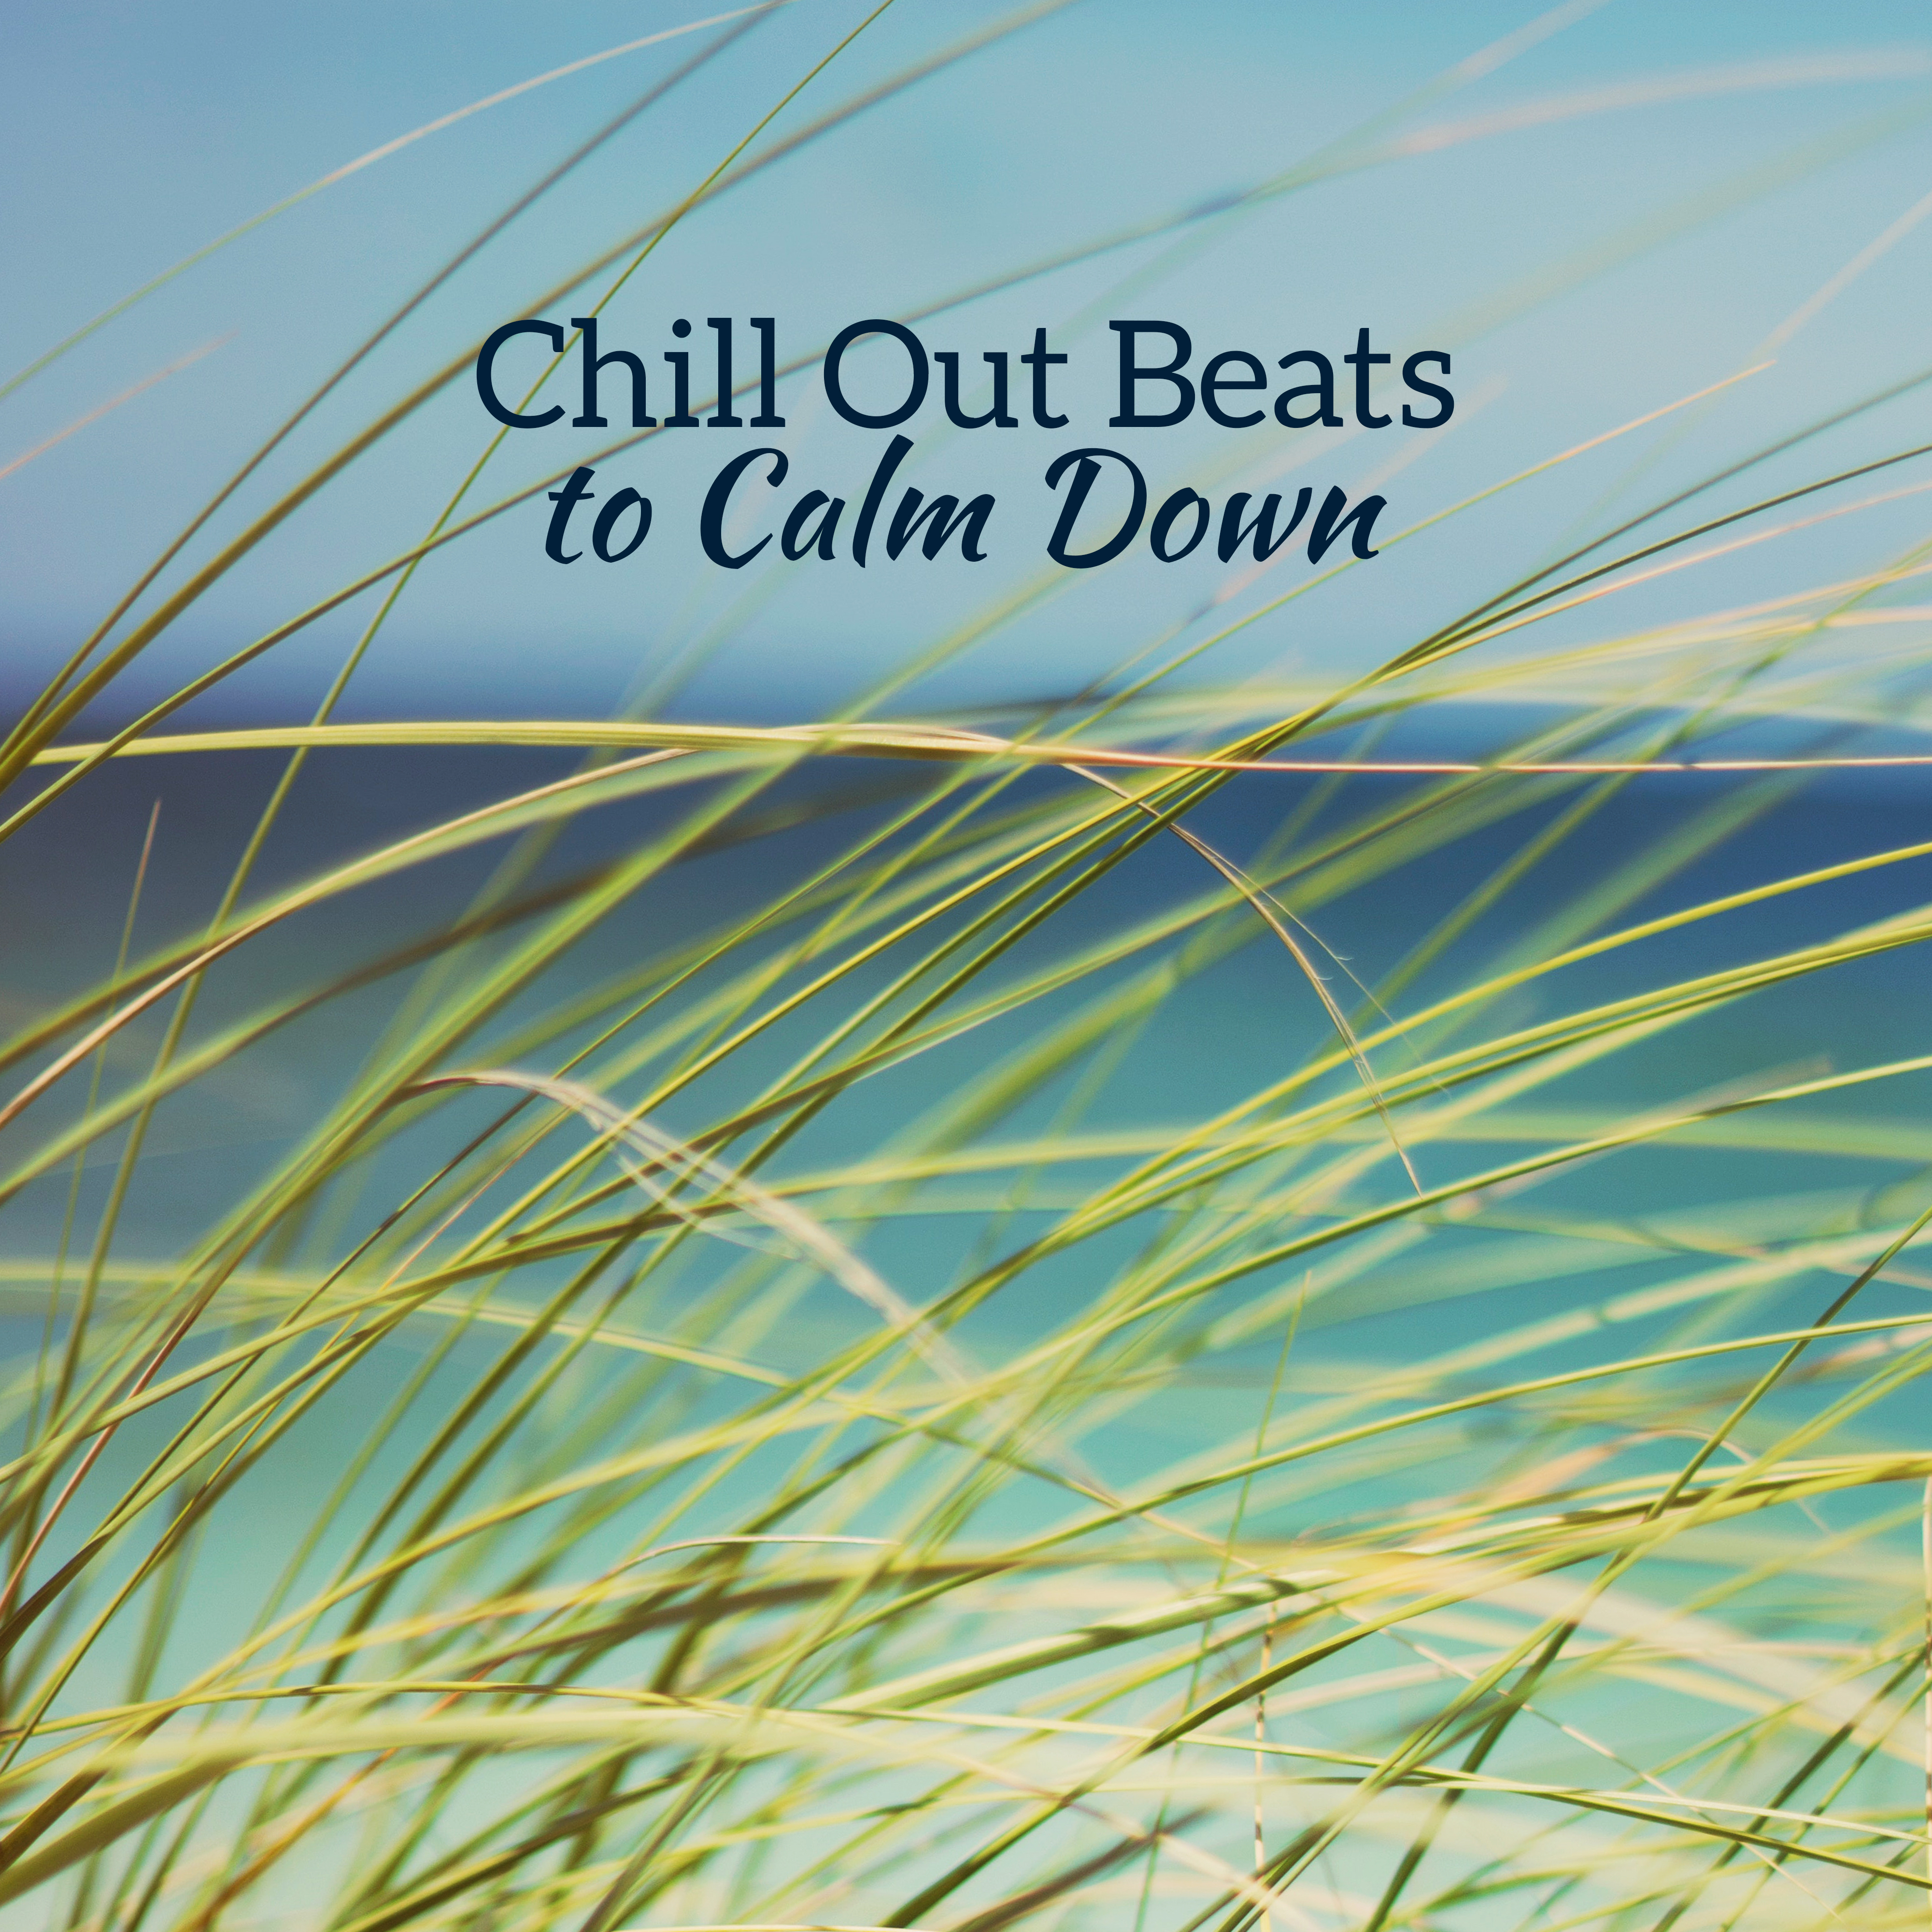 Chill Out Beats to Calm Down – Chill Out Melodies to Rest, Beats for Summer, Chill a Bit, Peaceful Vibes